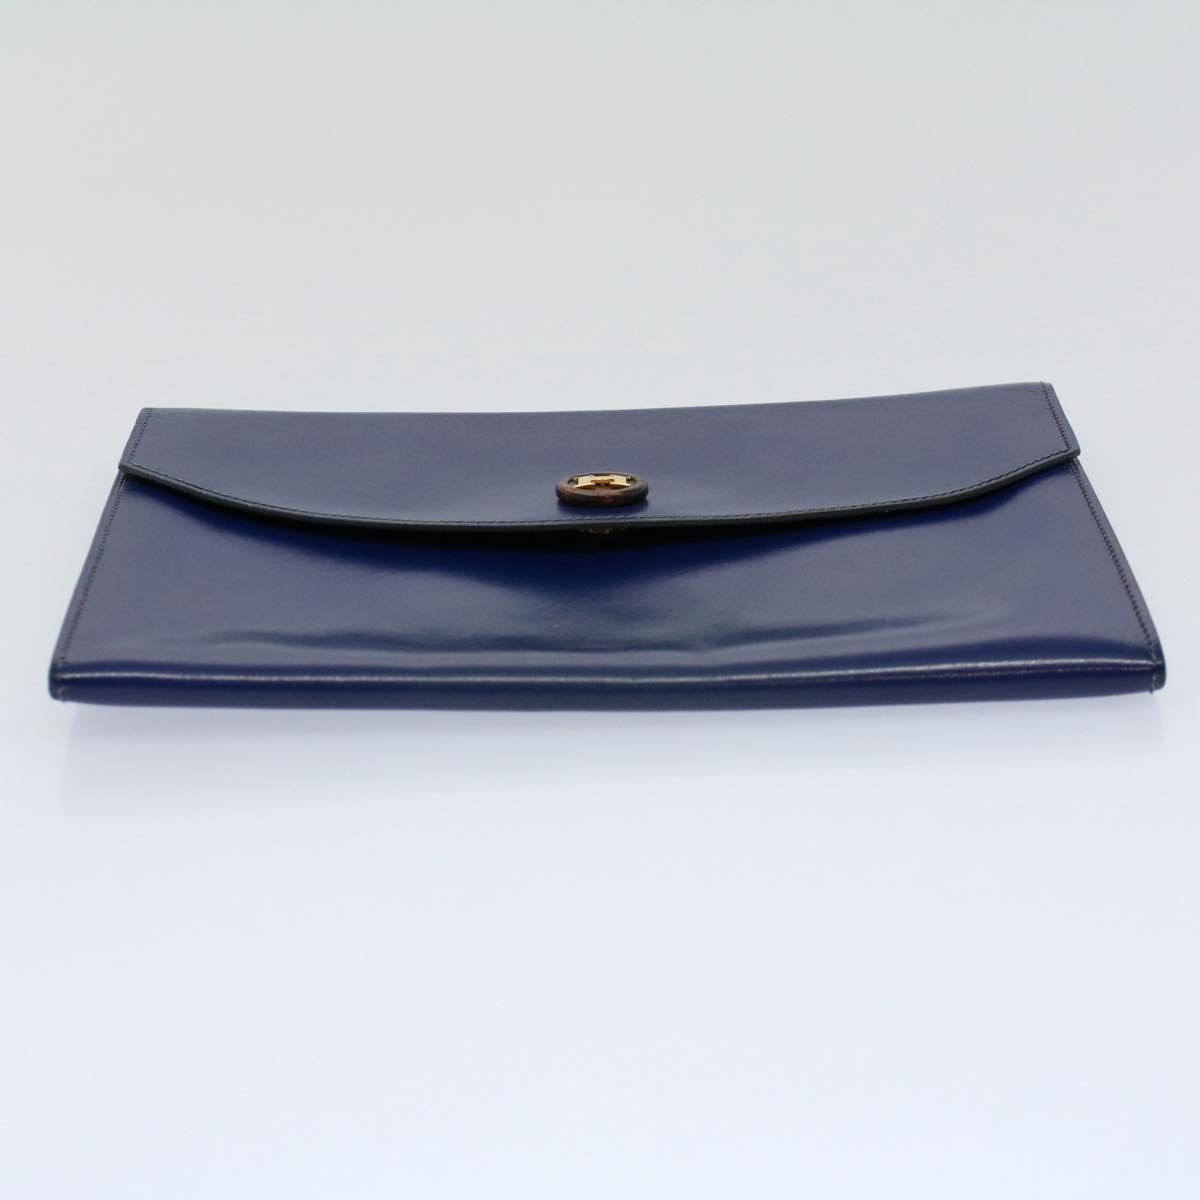 HERMES Clutch Bag Leather Blue Auth bs10101